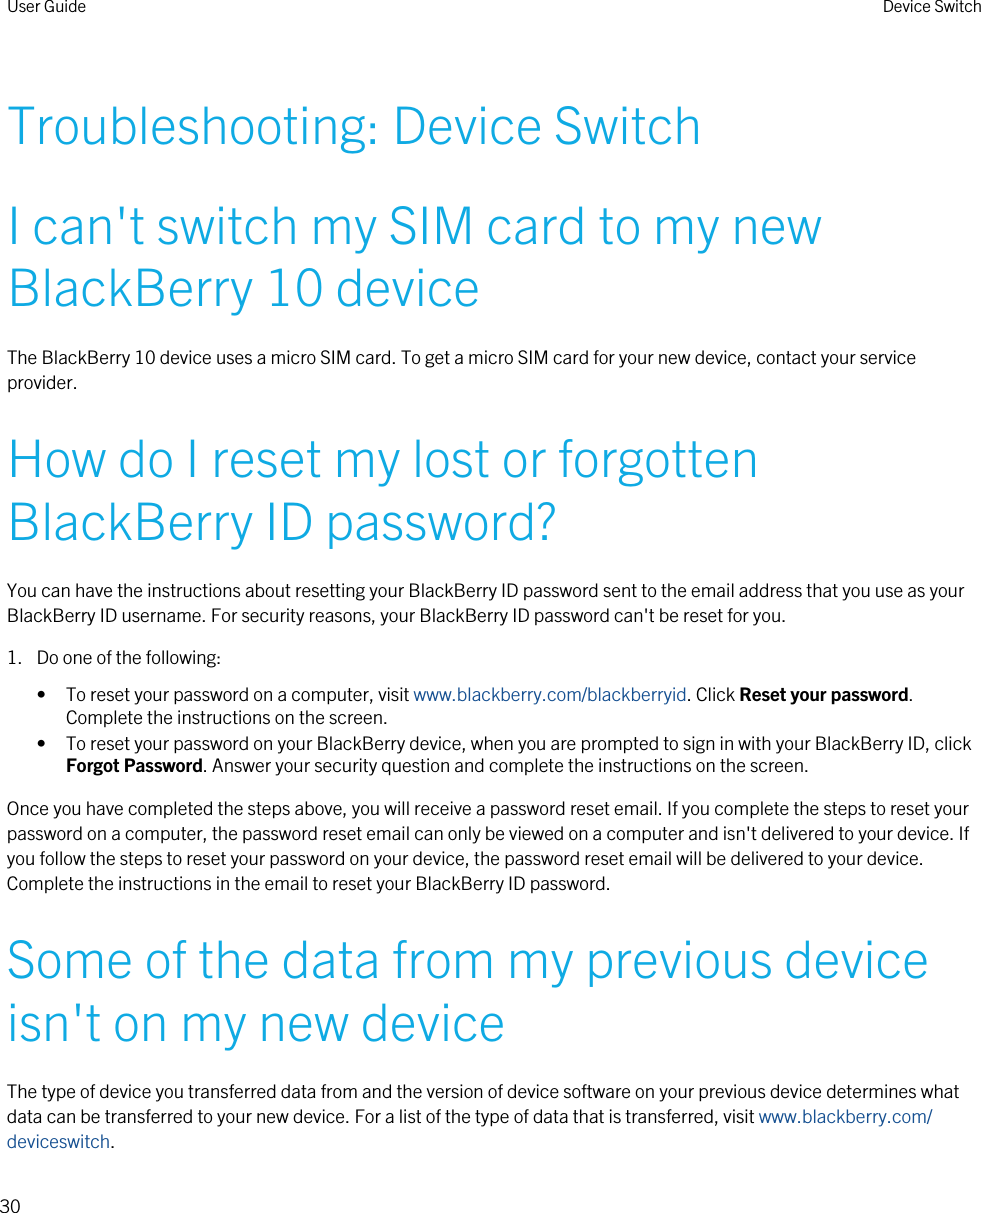 Troubleshooting: Device SwitchI can&apos;t switch my SIM card to my new BlackBerry 10 deviceThe BlackBerry 10 device uses a micro SIM card. To get a micro SIM card for your new device, contact your service provider.How do I reset my lost or forgotten BlackBerry ID password?You can have the instructions about resetting your BlackBerry ID password sent to the email address that you use as your BlackBerry ID username. For security reasons, your BlackBerry ID password can&apos;t be reset for you.1. Do one of the following:• To reset your password on a computer, visit www.blackberry.com/blackberryid. Click Reset your password. Complete the instructions on the screen.• To reset your password on your BlackBerry device, when you are prompted to sign in with your BlackBerry ID, click Forgot Password. Answer your security question and complete the instructions on the screen.Once you have completed the steps above, you will receive a password reset email. If you complete the steps to reset your password on a computer, the password reset email can only be viewed on a computer and isn&apos;t delivered to your device. If you follow the steps to reset your password on your device, the password reset email will be delivered to your device. Complete the instructions in the email to reset your BlackBerry ID password.Some of the data from my previous device isn&apos;t on my new deviceThe type of device you transferred data from and the version of device software on your previous device determines what data can be transferred to your new device. For a list of the type of data that is transferred, visit www.blackberry.com/deviceswitch.User Guide Device Switch30 